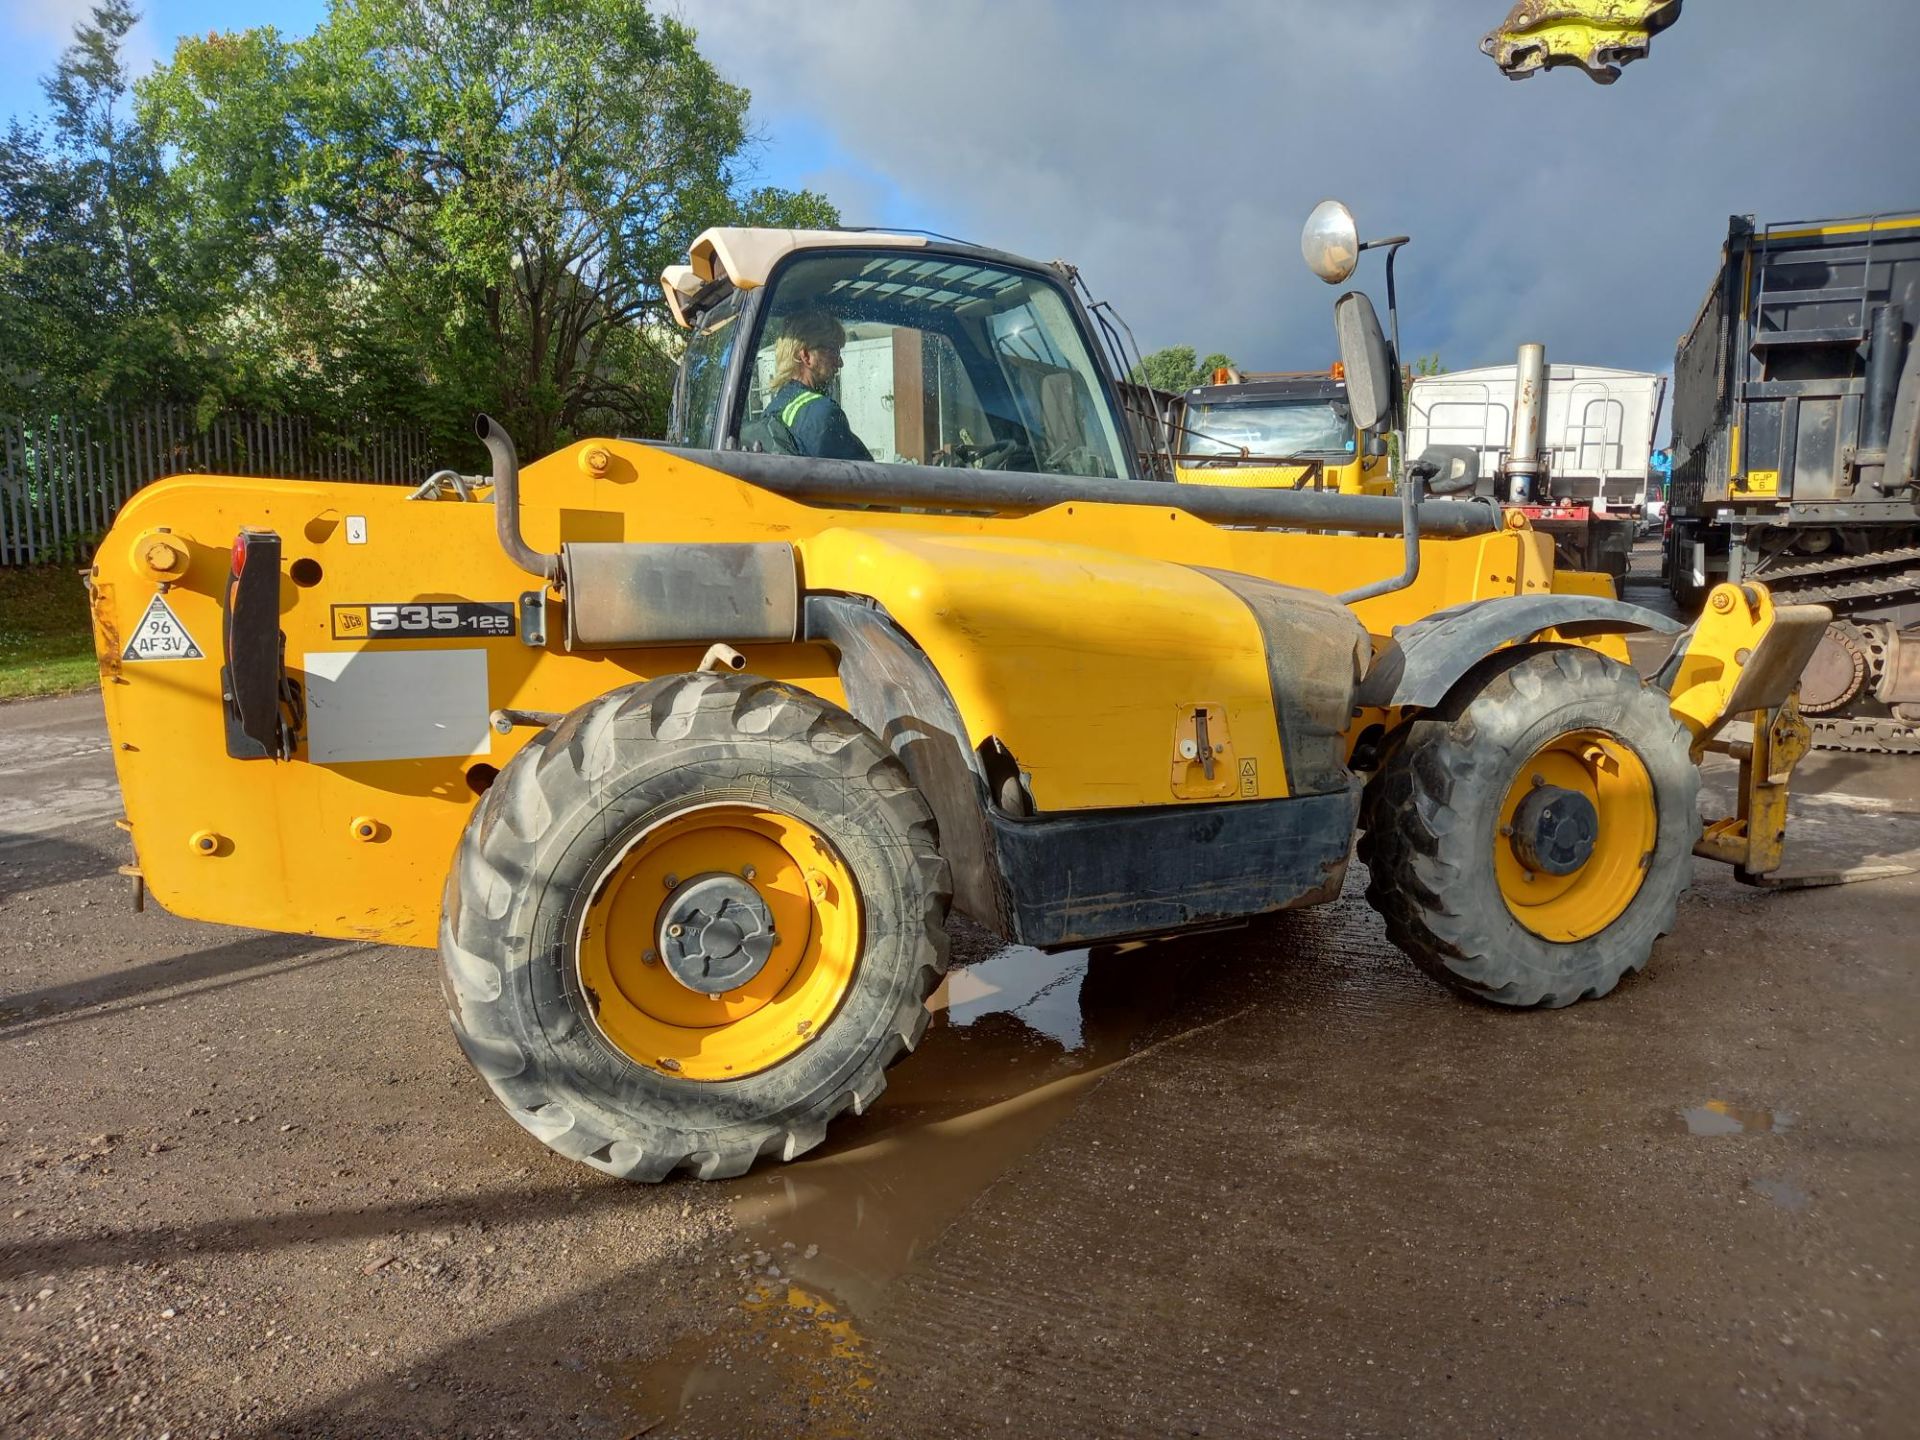 2012 JCB 535-125 Hi Viz 4x4 telehandler c/w forks and fitted with 3rd hydraulic line. Approx. 6680 r - Image 2 of 9